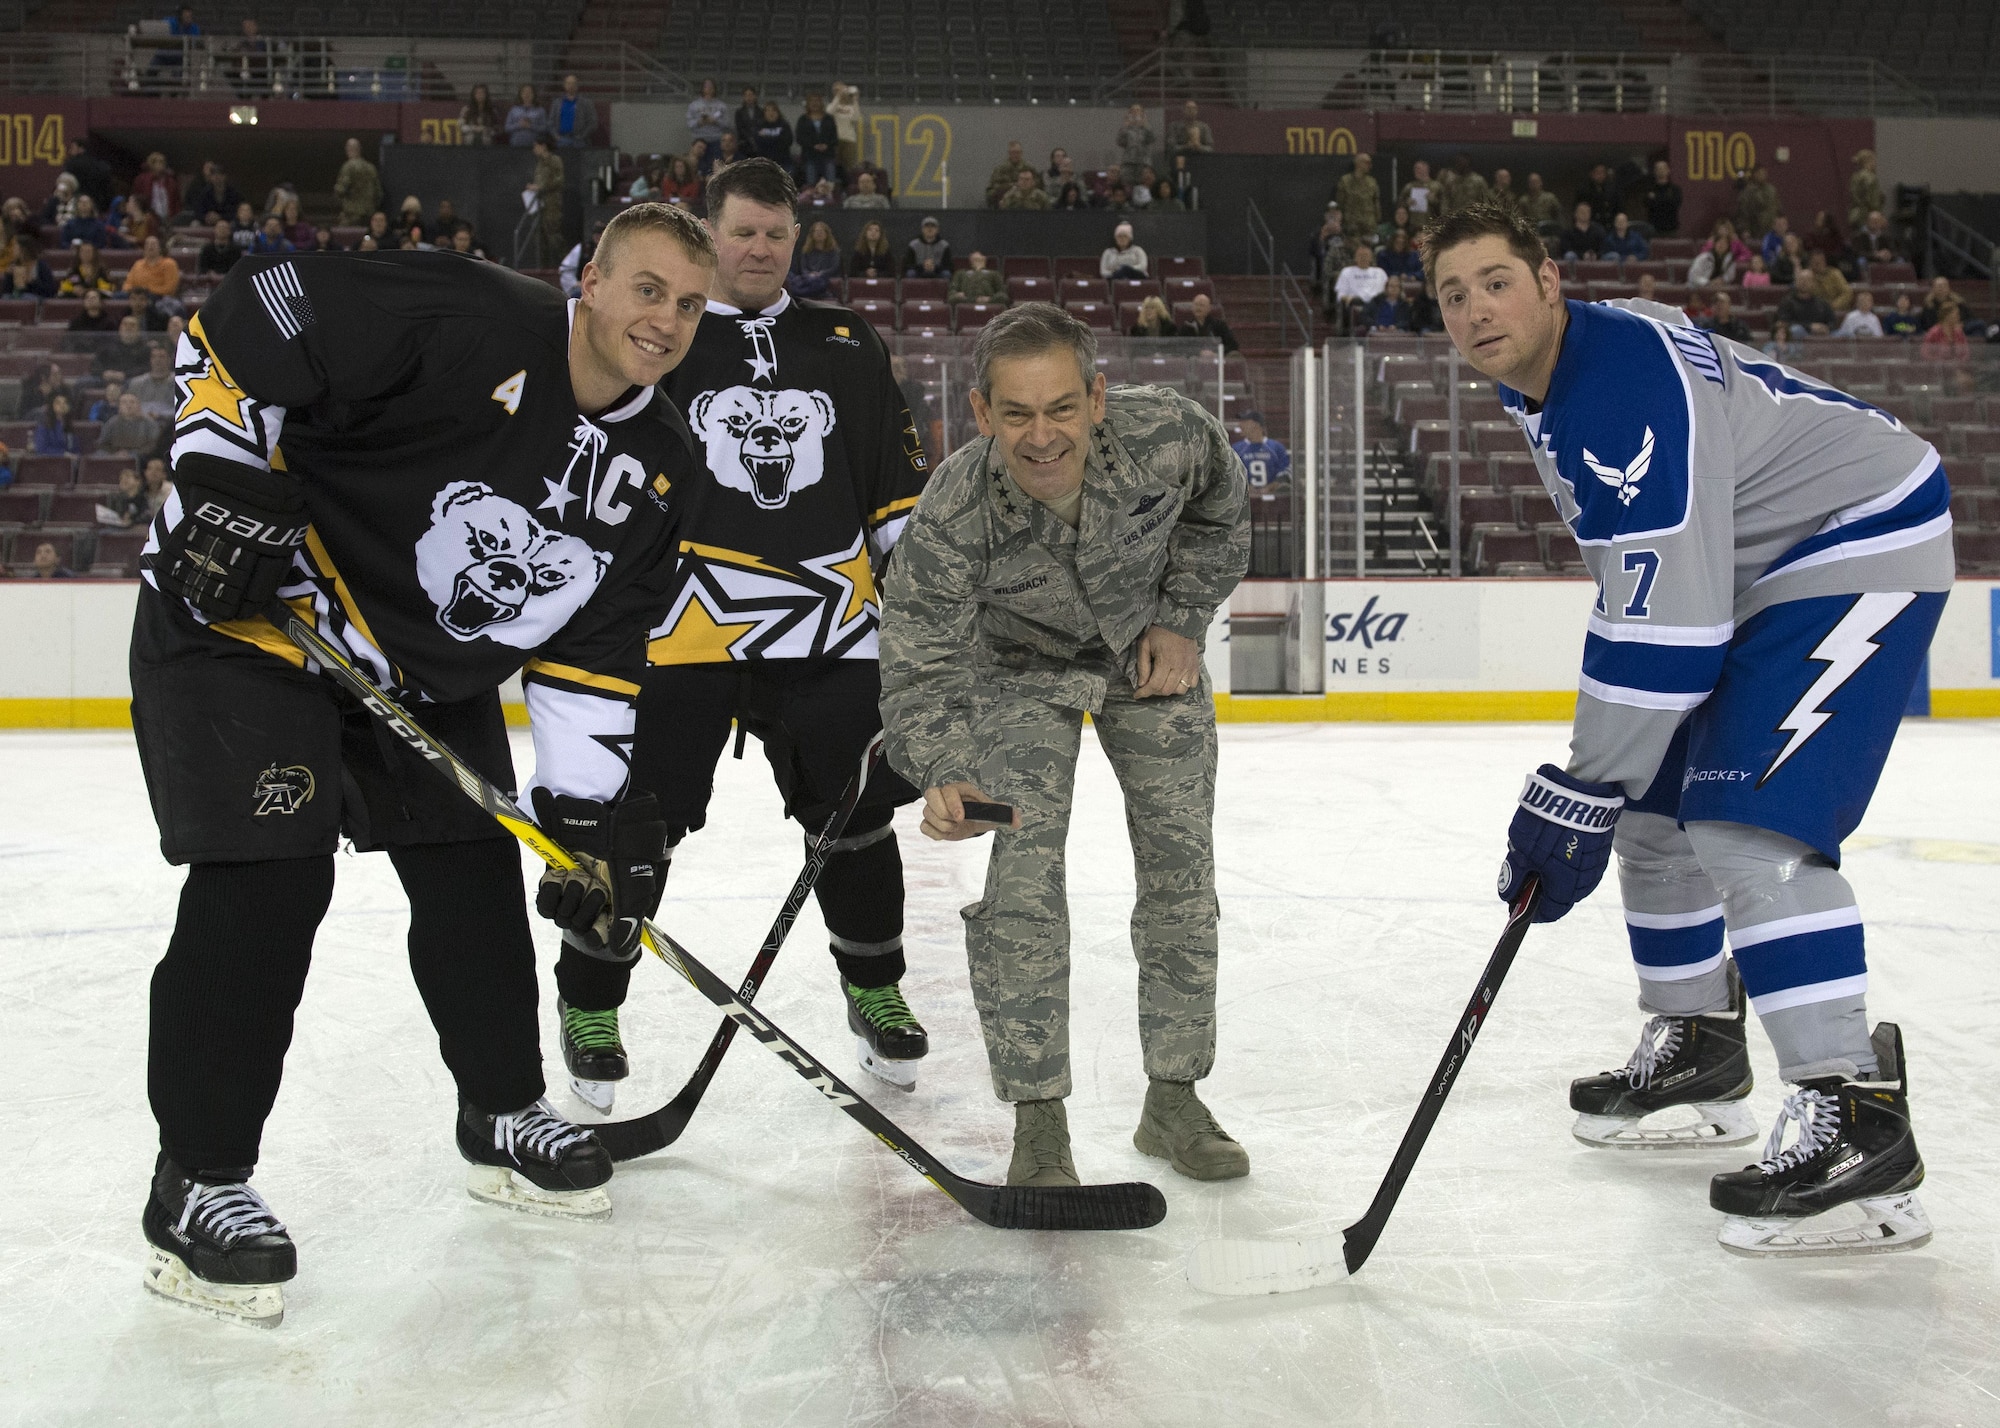 U.S. Air Force Lt. Gen. Kenneth S. Wilsbach, commander Alaskan Command, Alaska NORAD Region and 11th Air Force drops the ceremonial puck prior to the start of the 5th Annual Army vs. Air Force Hockey Game, Jan. 13, 2018, at the Sullivan Arena in Anchorage, Alaska. The game is played annually between teams made of service members assigned to Joint Base Elmendorf-Richardson, Alaska, promotes military esprit de corps and enhances the relationship between JBER and the Anchorage community.